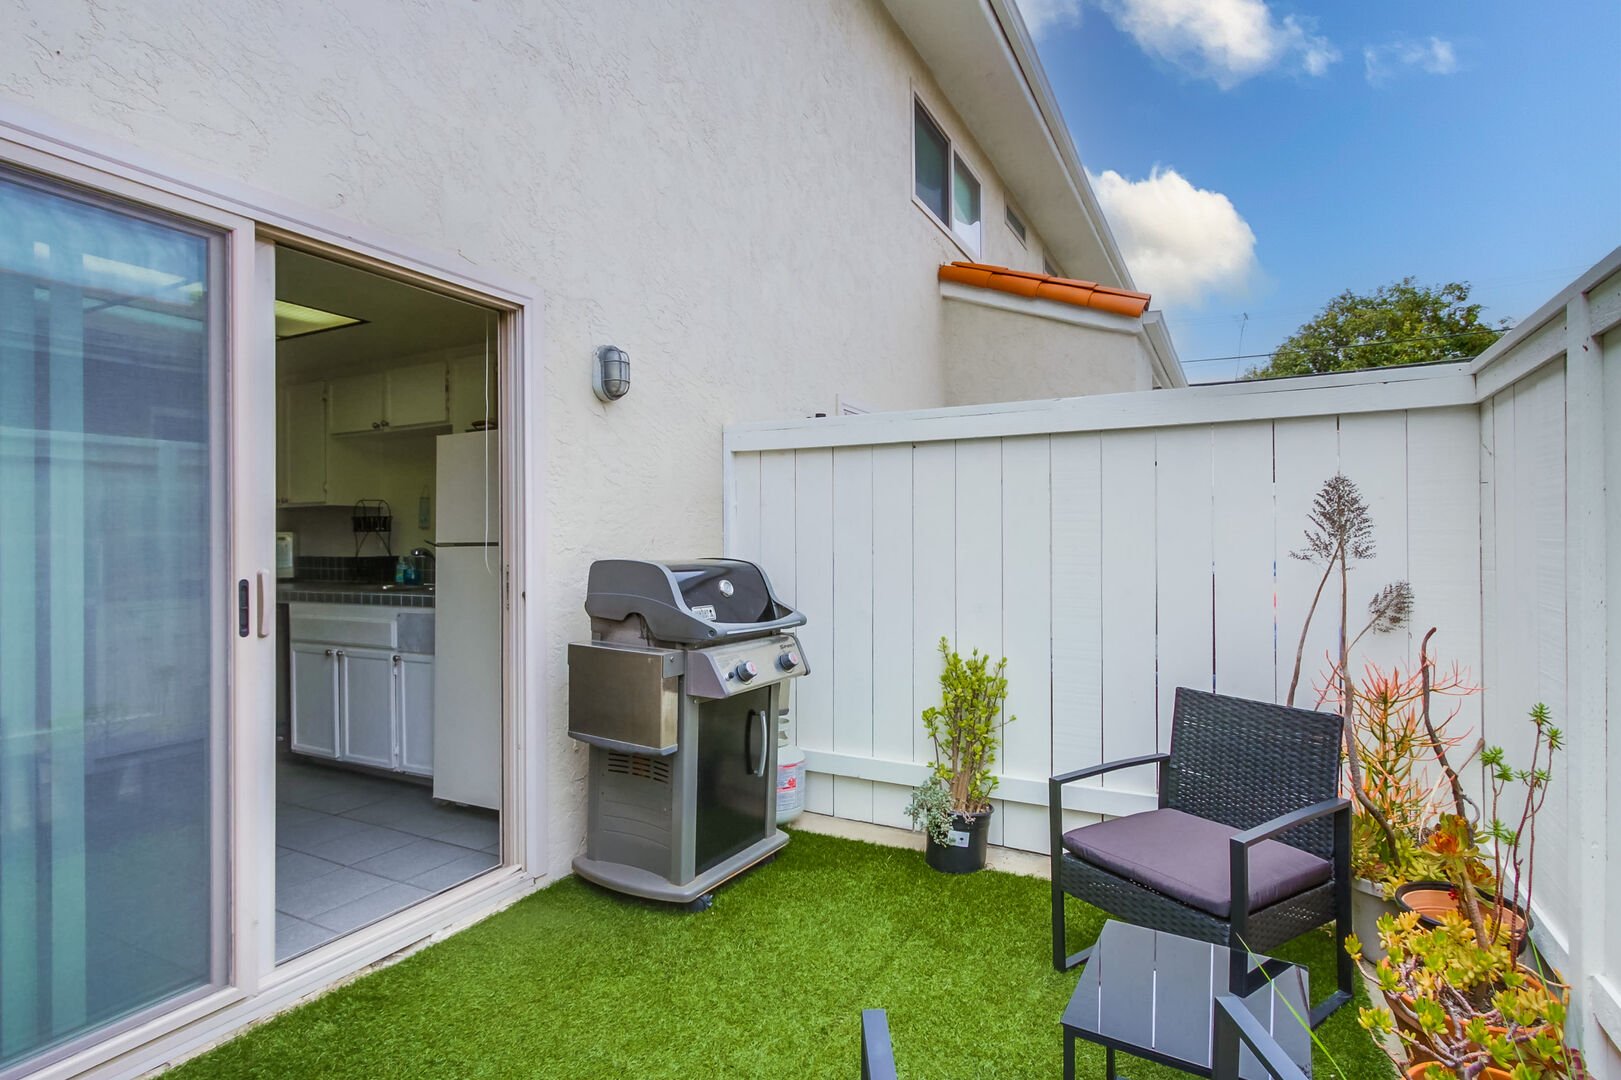 Patio space with dog-friendly enclosed turf area, propane grill, table and chairs and plenty of beach accessories